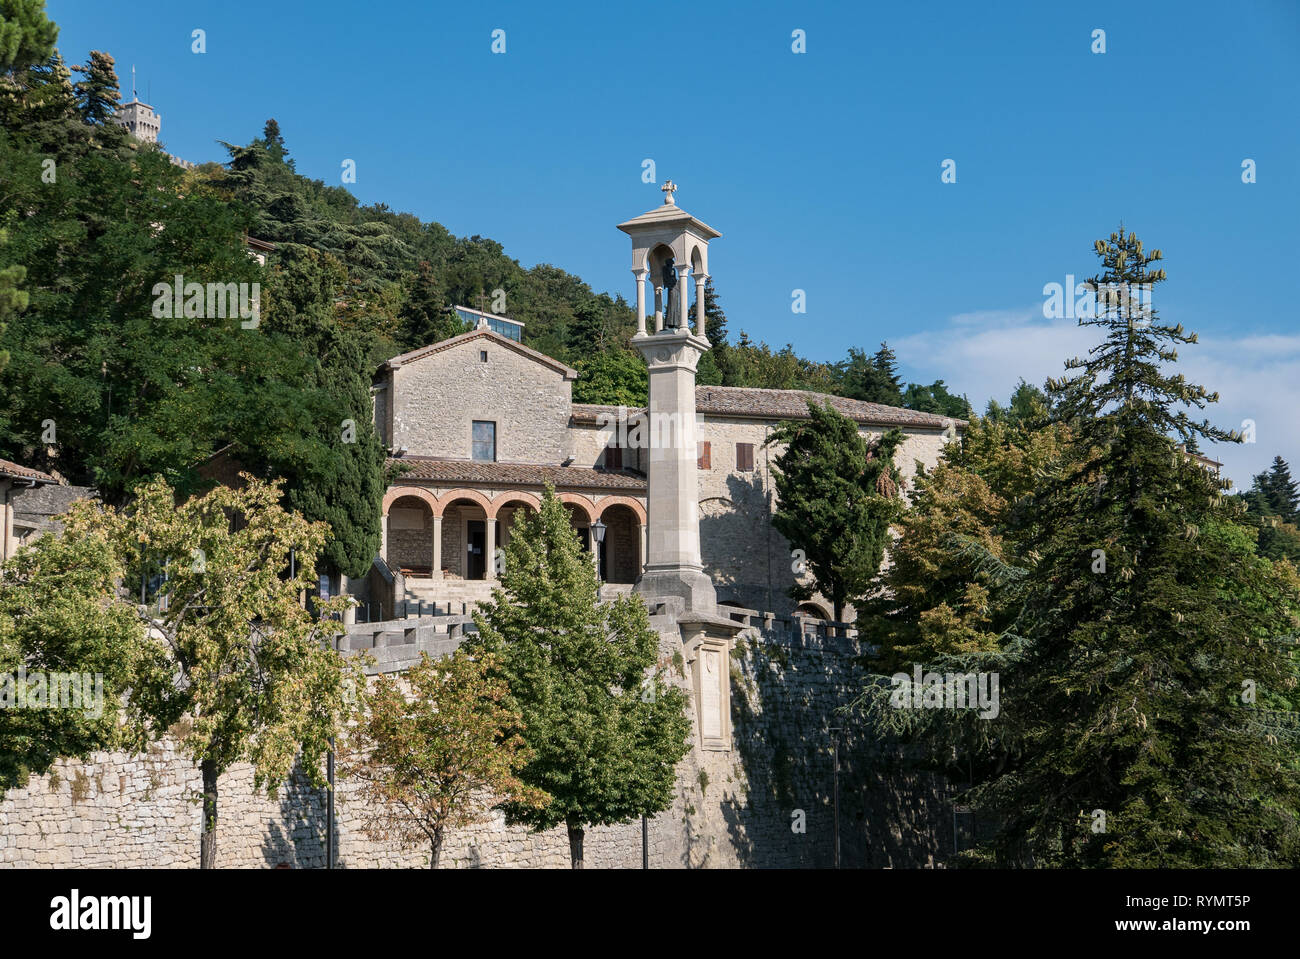 Quirino Italy High Resolution Stock Photography and Images - Alamy